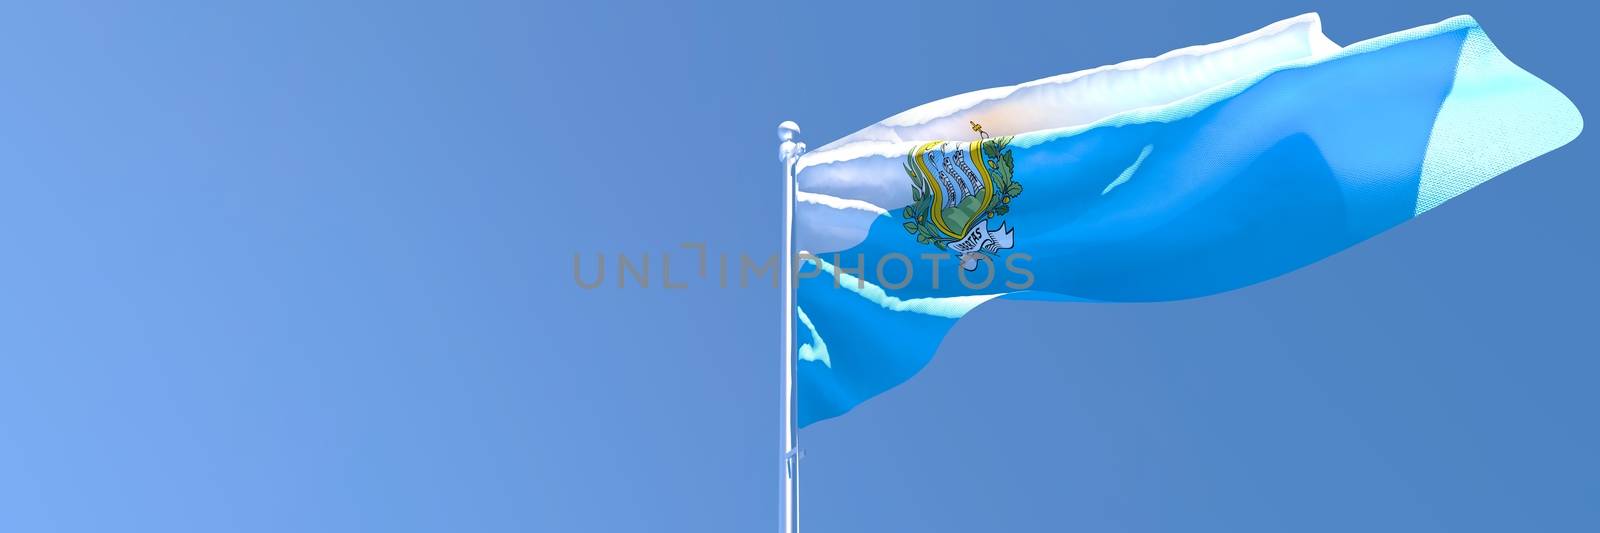 3D rendering of the national flag of San Marino waving in the wind against a blue sky